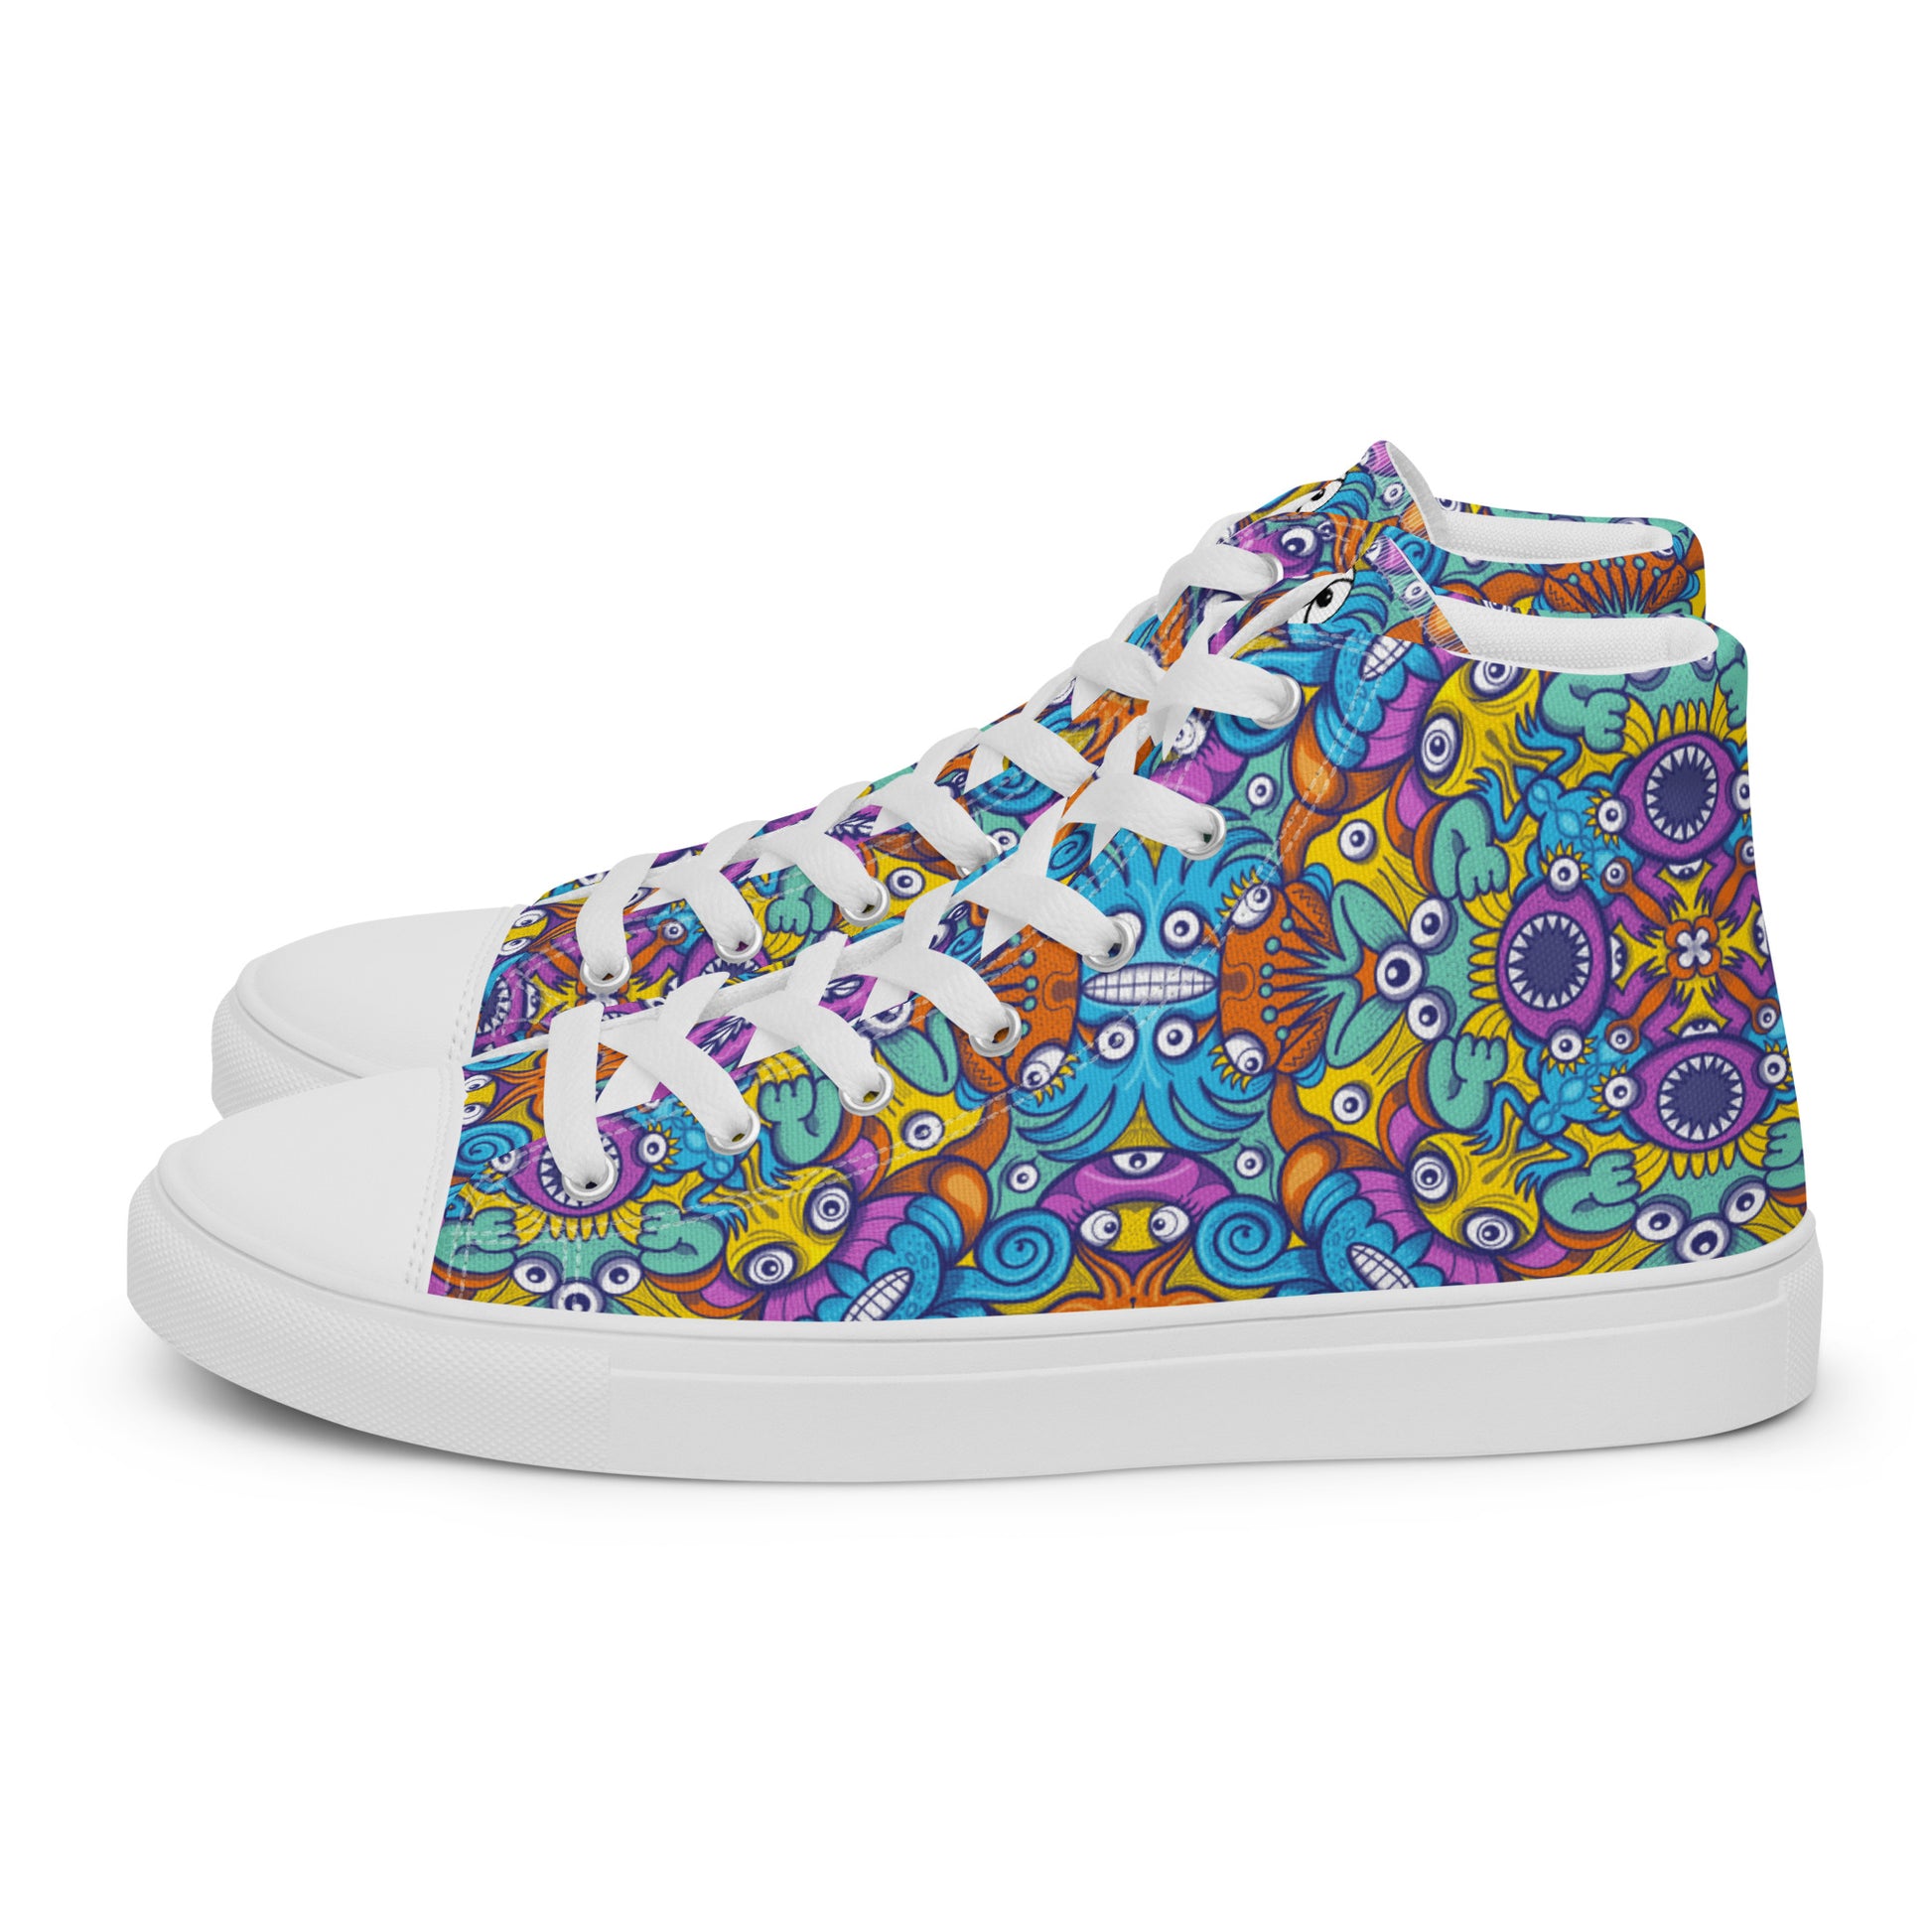 The ultimate sea beasts cast from the deep end of the ocean Men’s high top canvas shoes. Side view